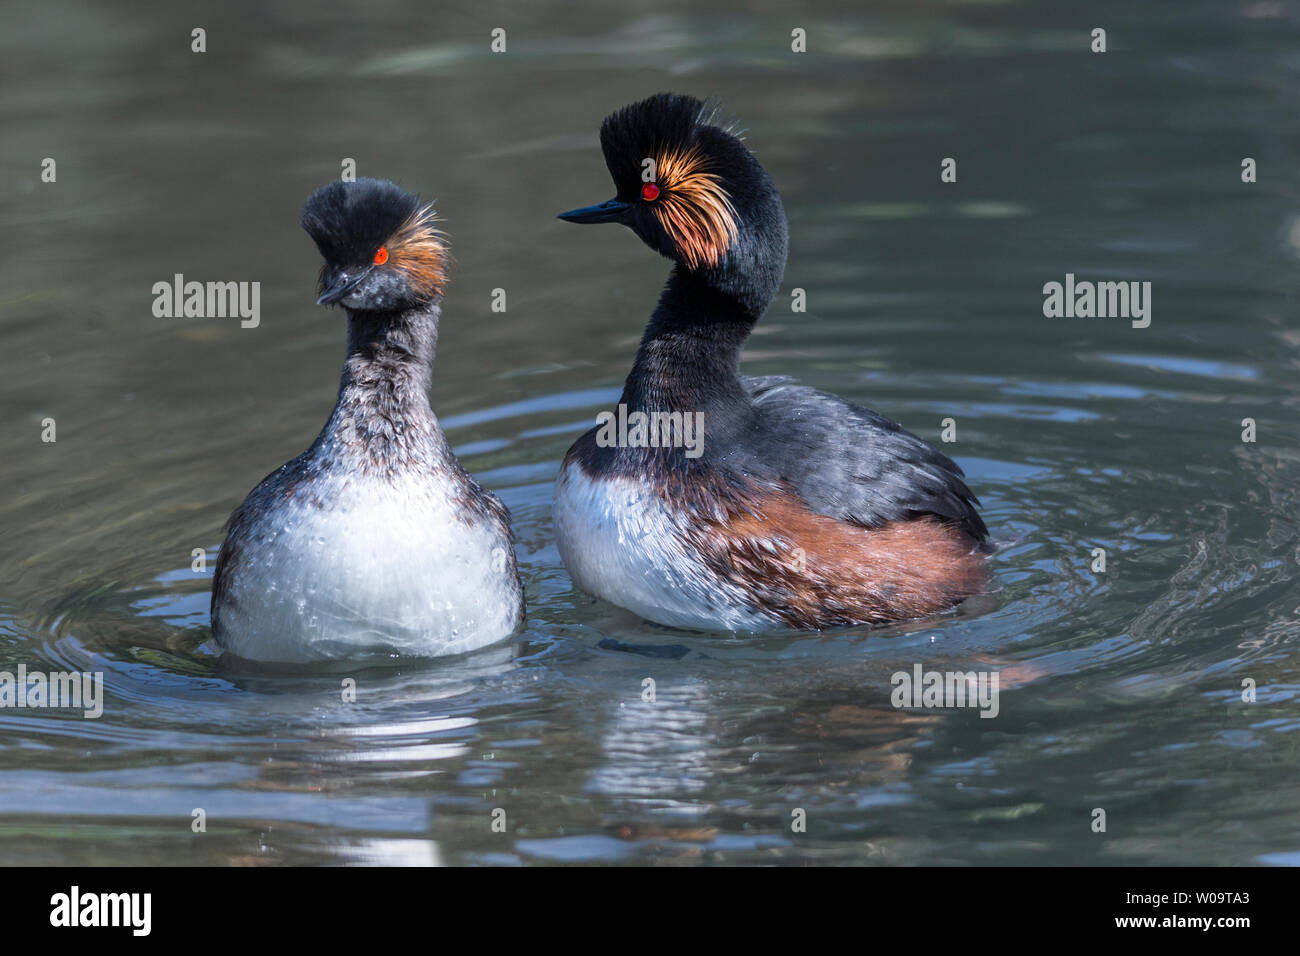 Black-necked Grebe (Podiceps nigricollis).Pair of adults, in breeding plumage, in courtship display. Stock Photo